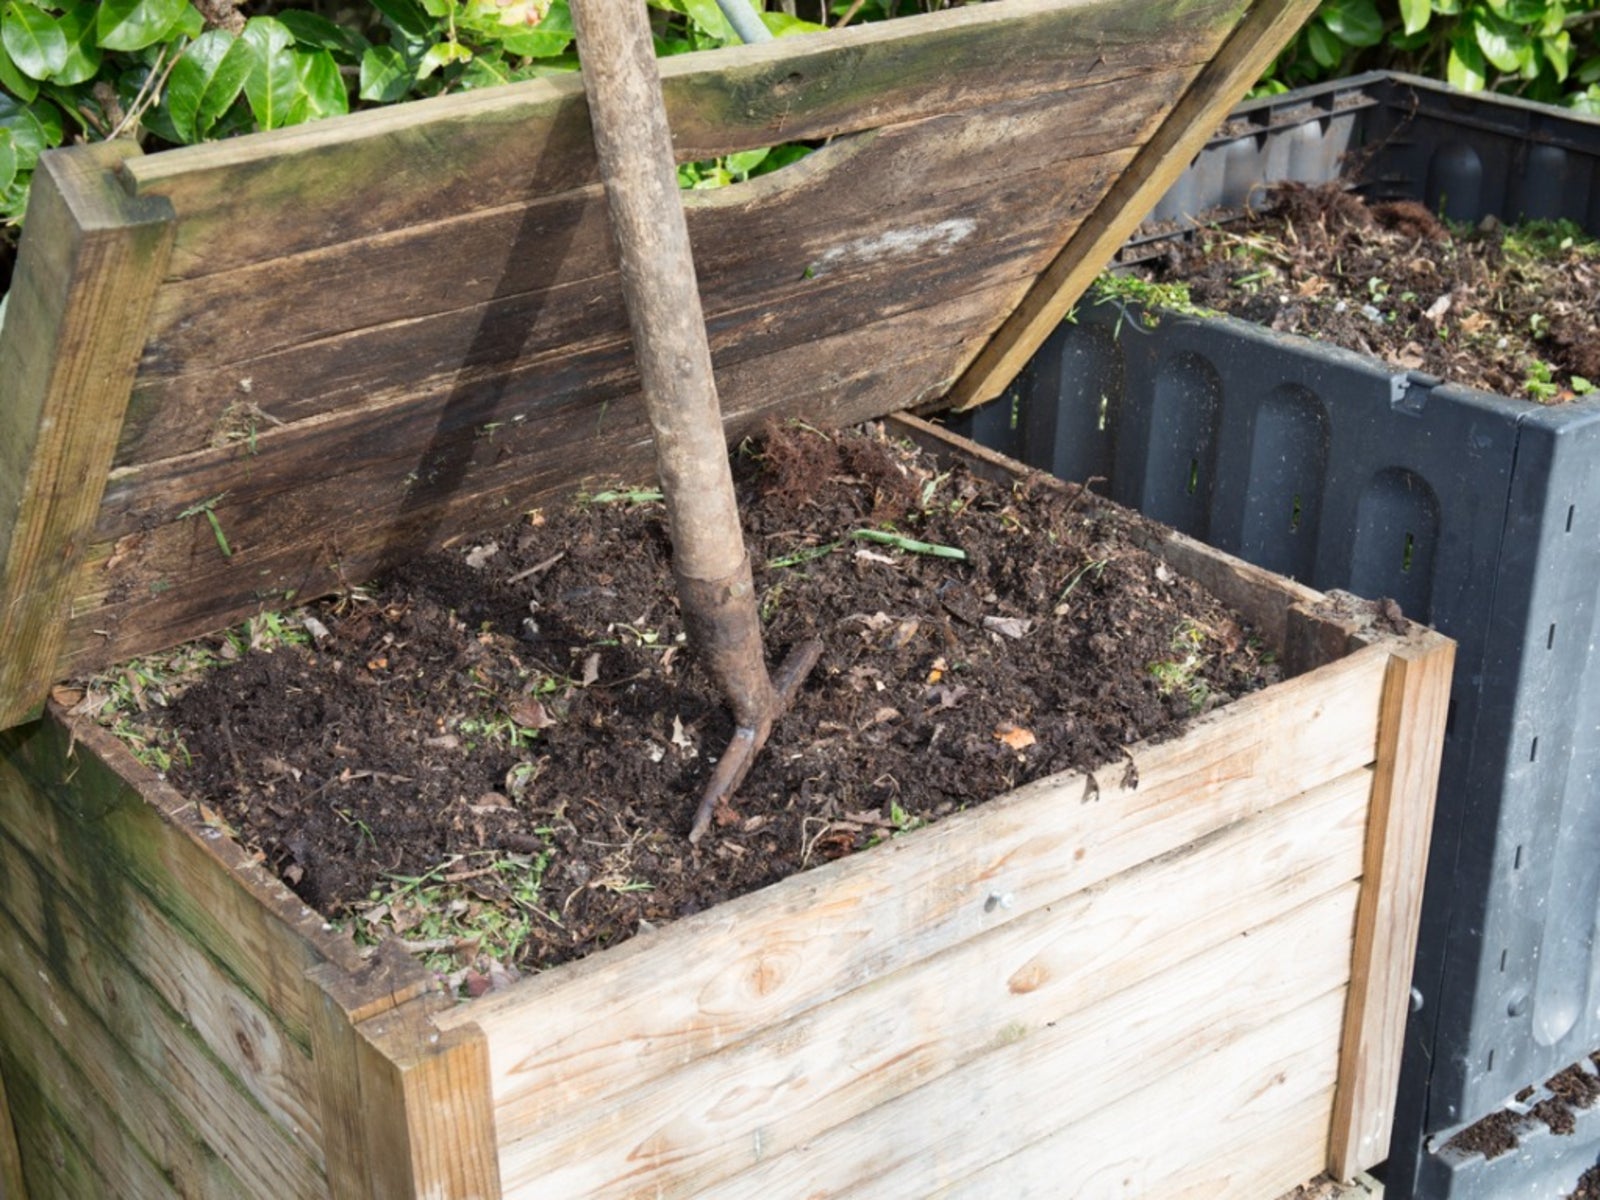 Composting For Beginners. Compost is an essential tool on the